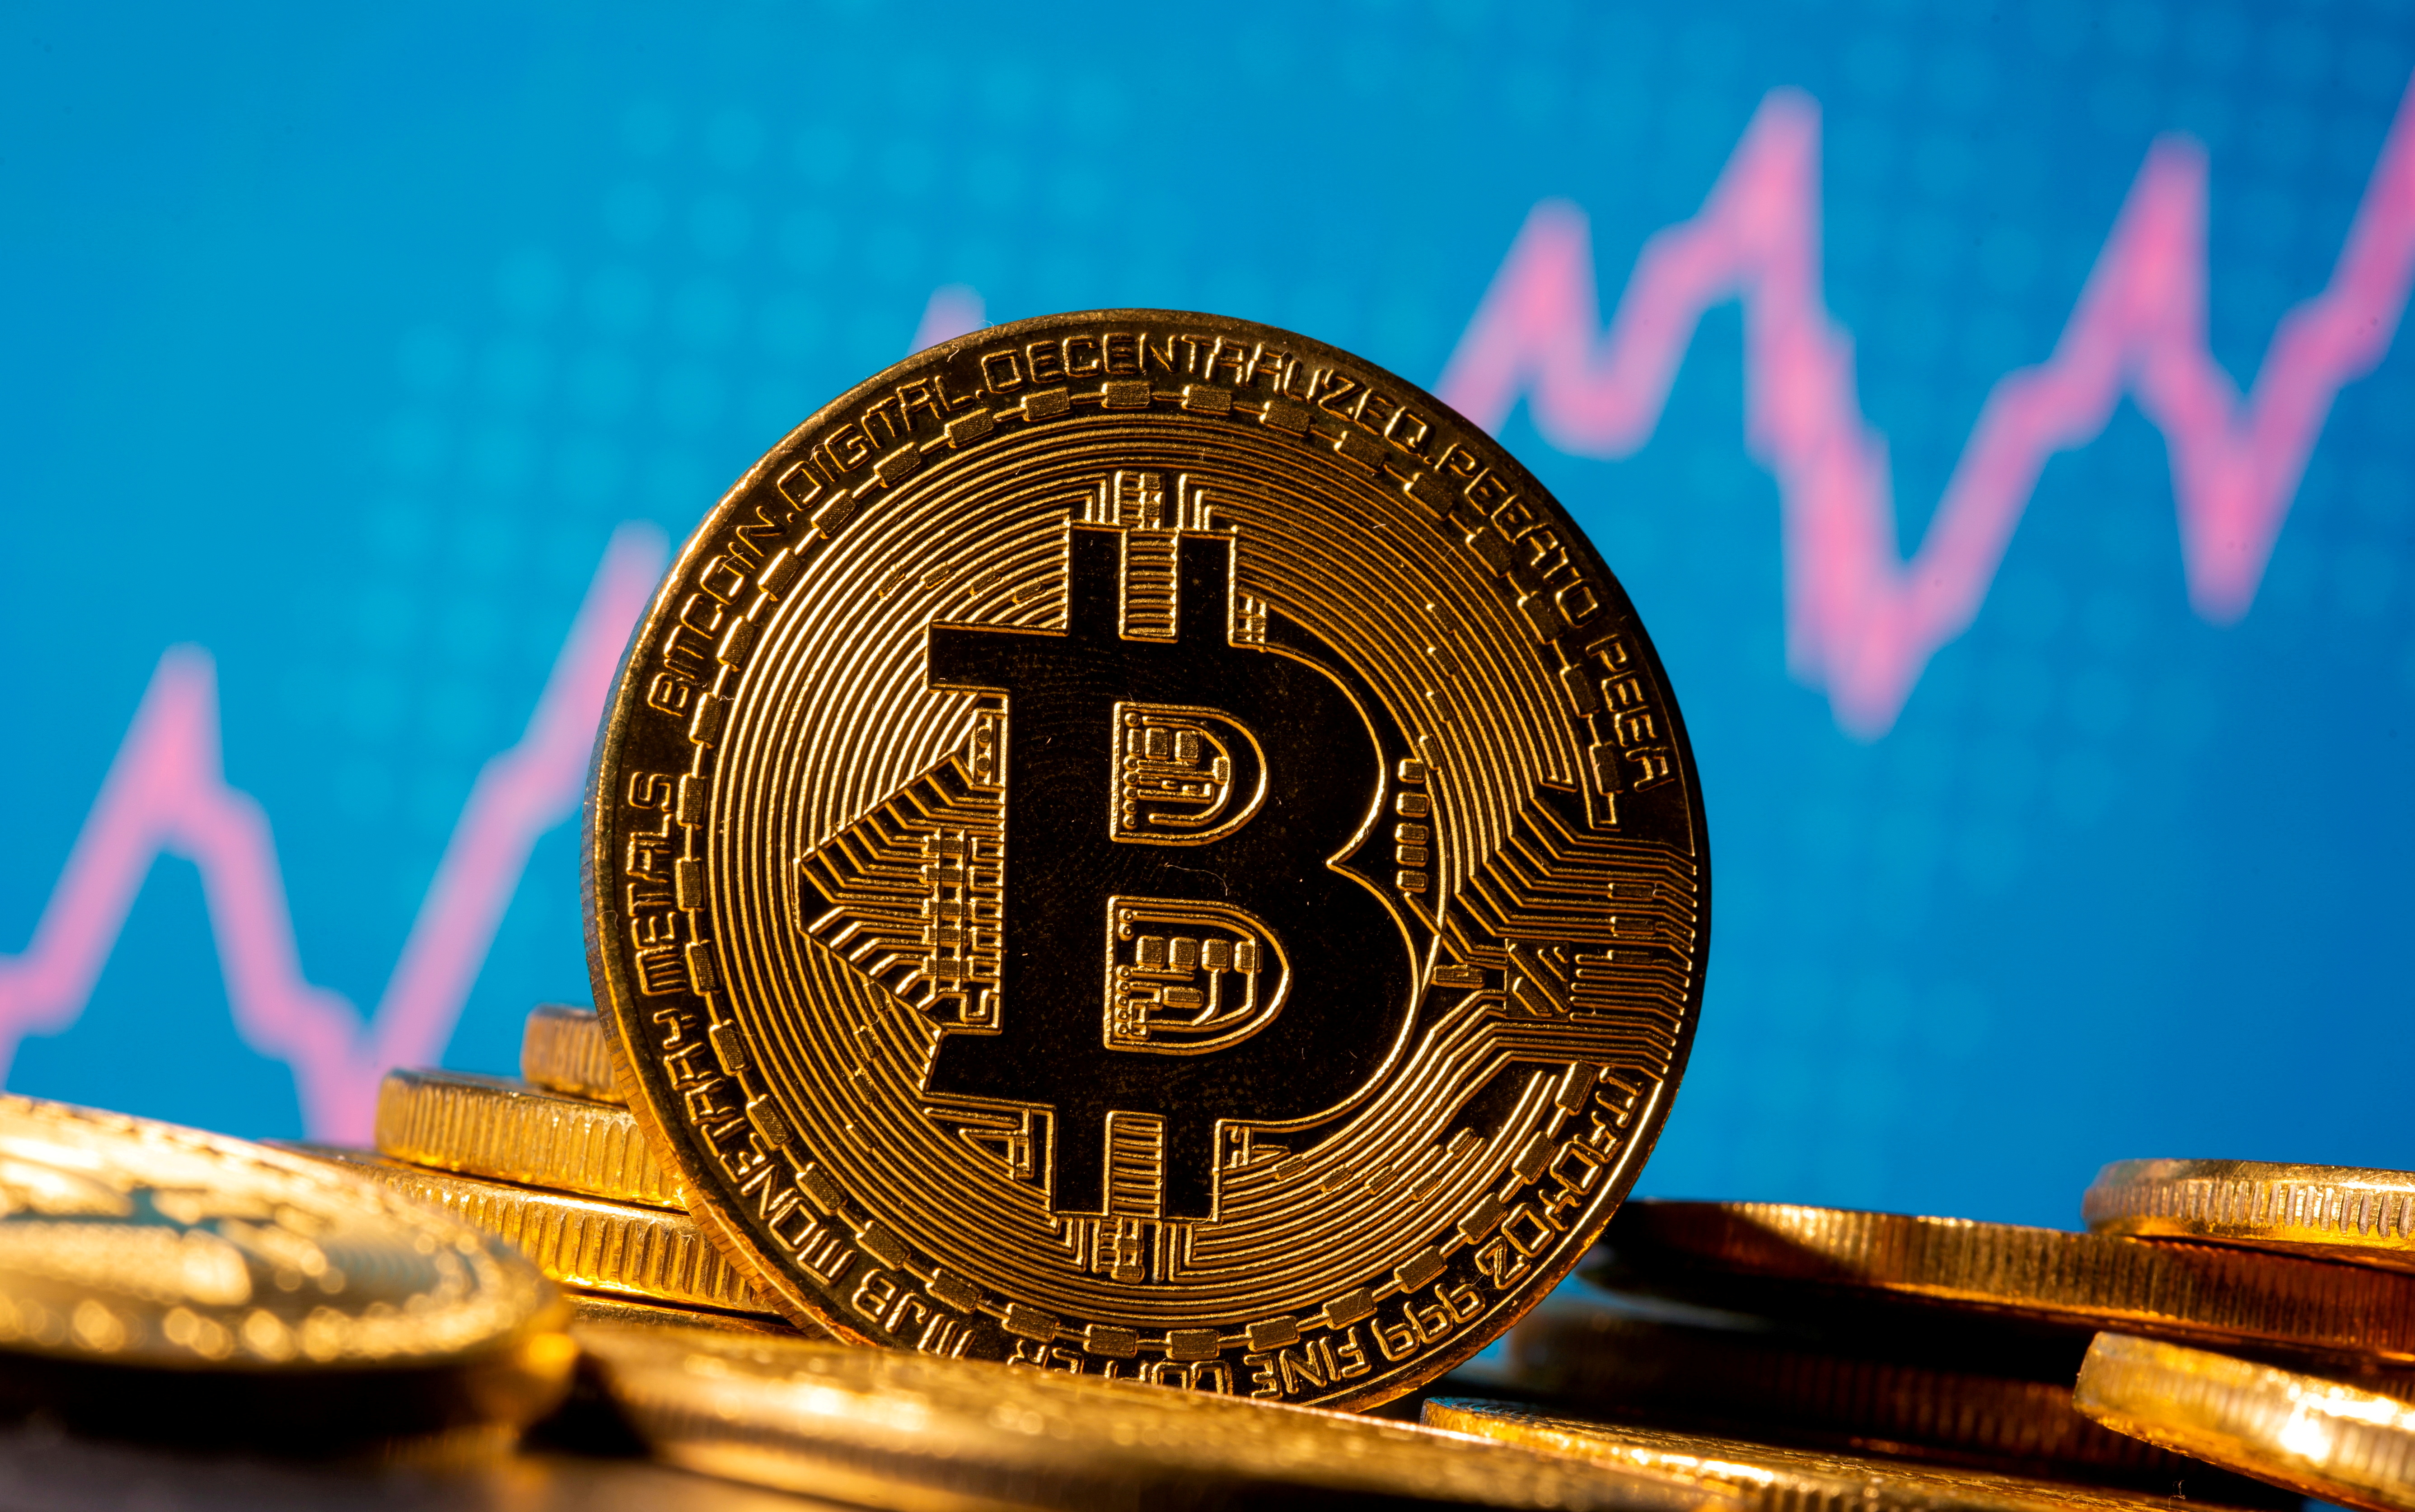 A representation of virtual currency bitcoin is seen in front of a stock graph